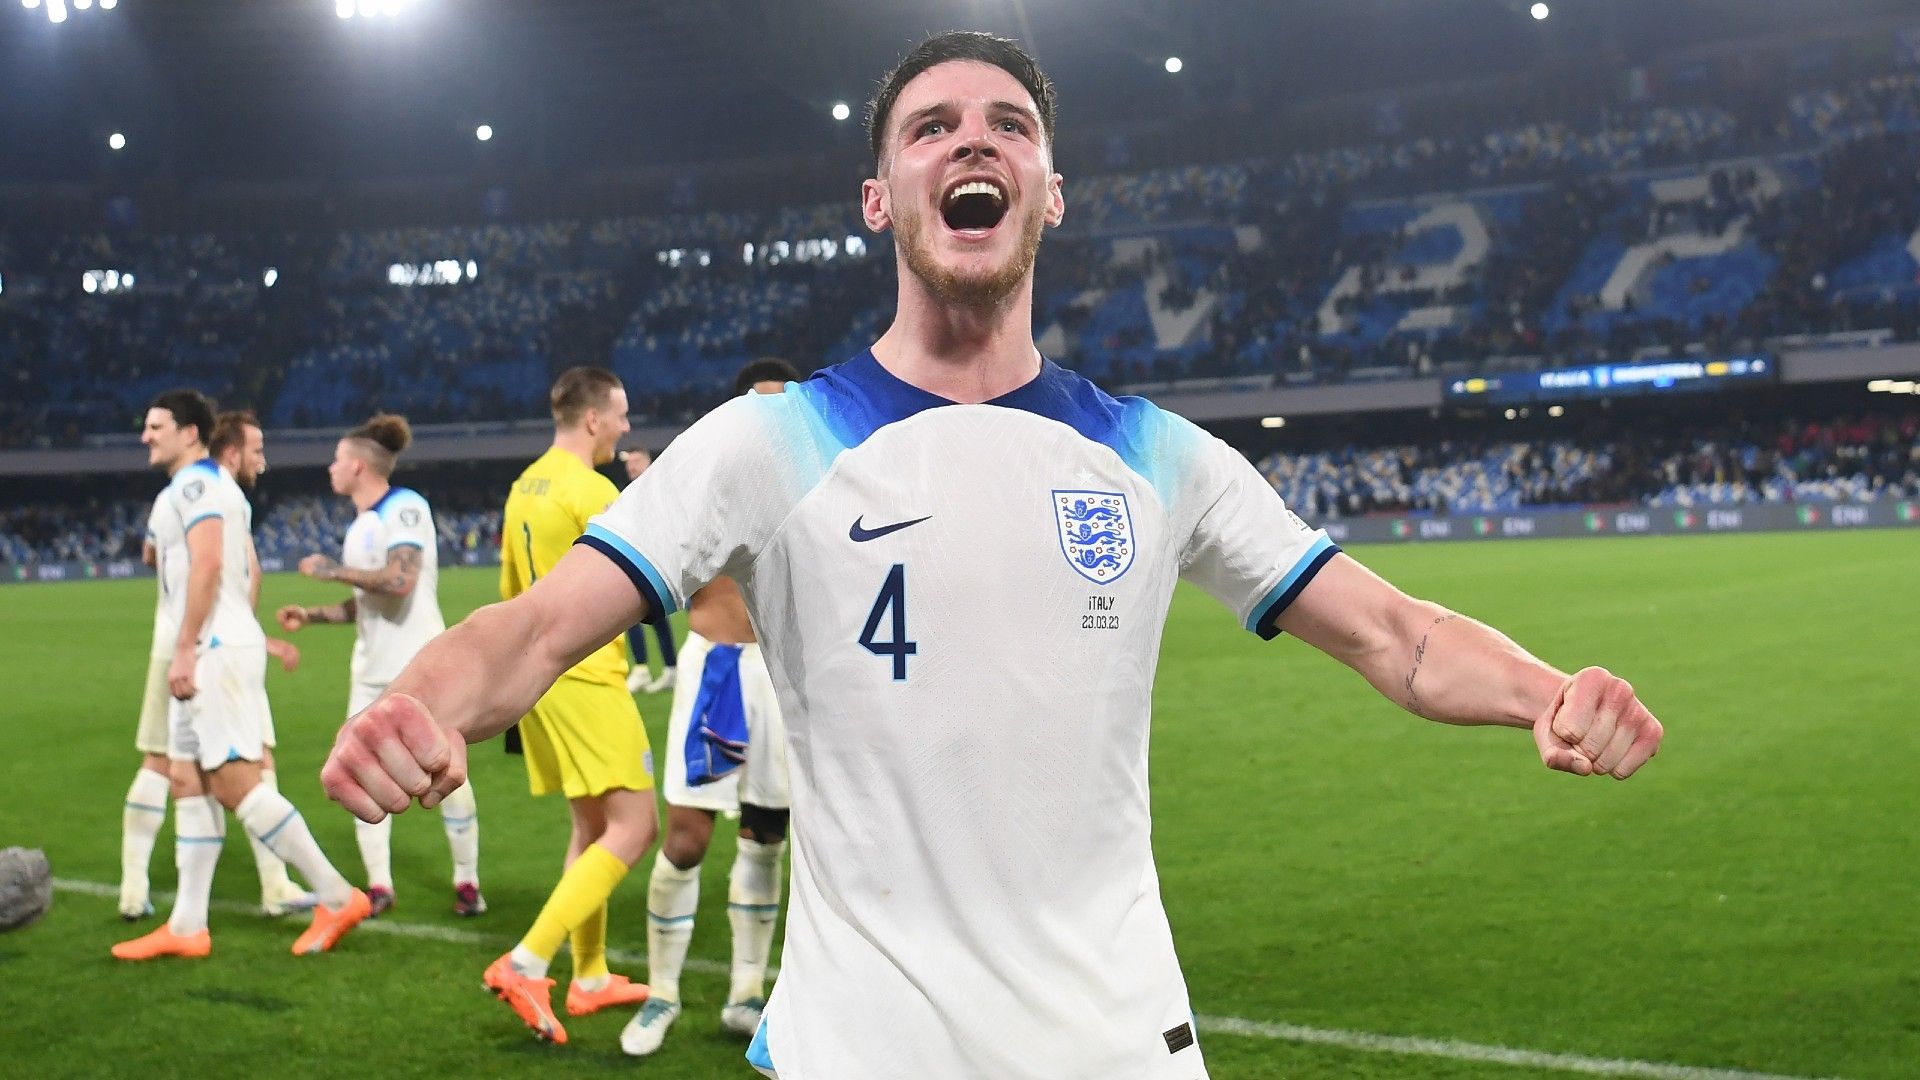 Explained: Why Declan Rice wears a No. 41 jersey | Goal.com US